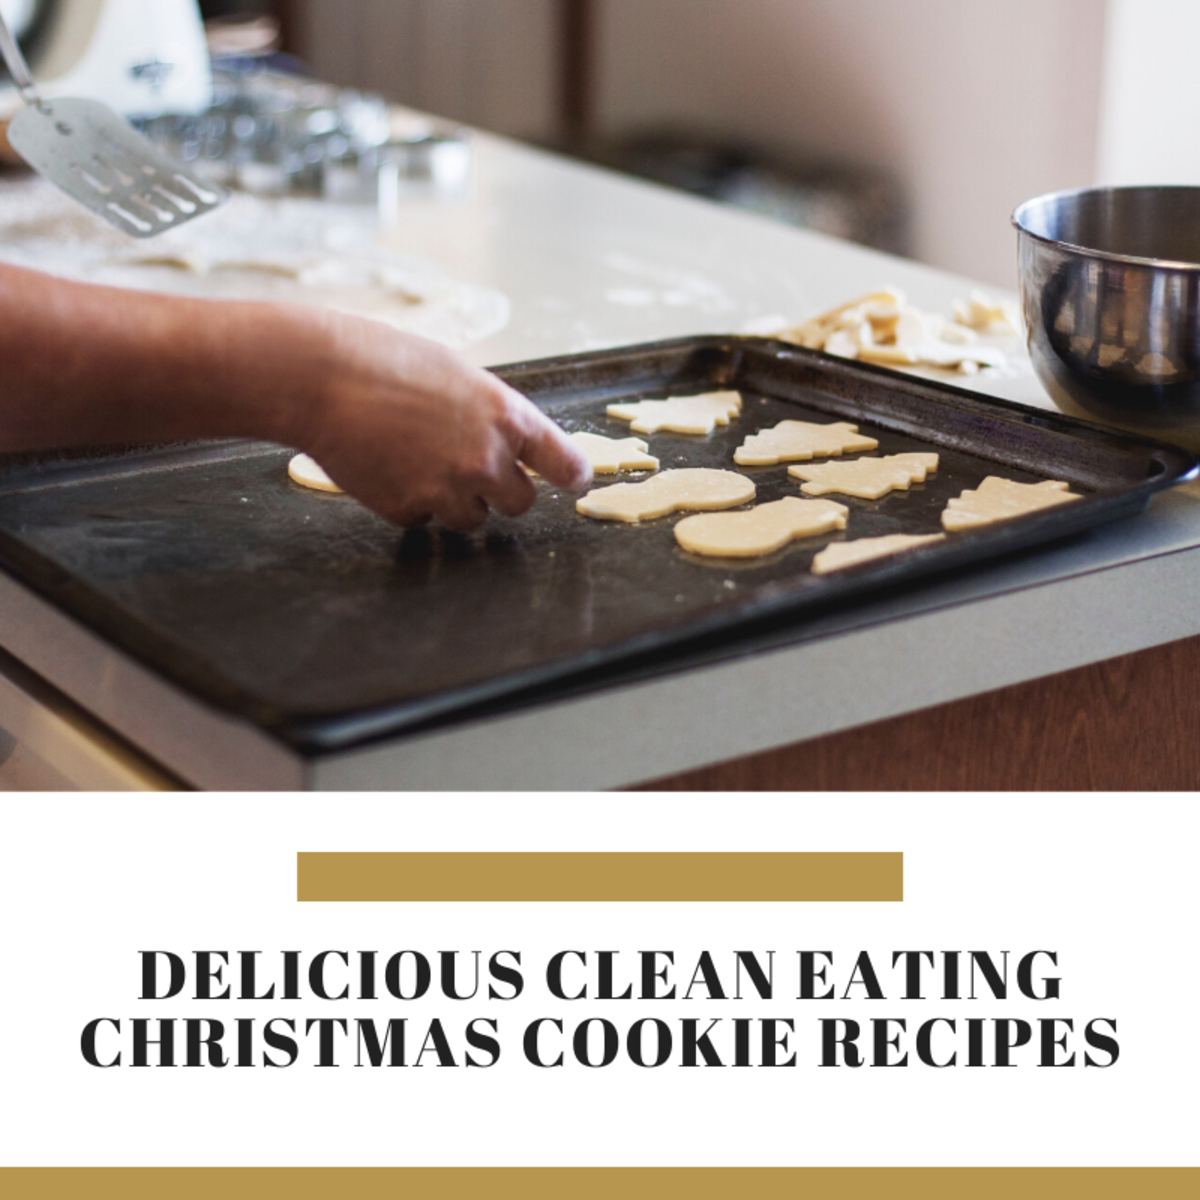 https://images.saymedia-content.com/.image/t_share/MTc0NDI4NDY4OTA4NDAyMDI0/12-delicious-clean-eating-christmas-cookie-recipes.png